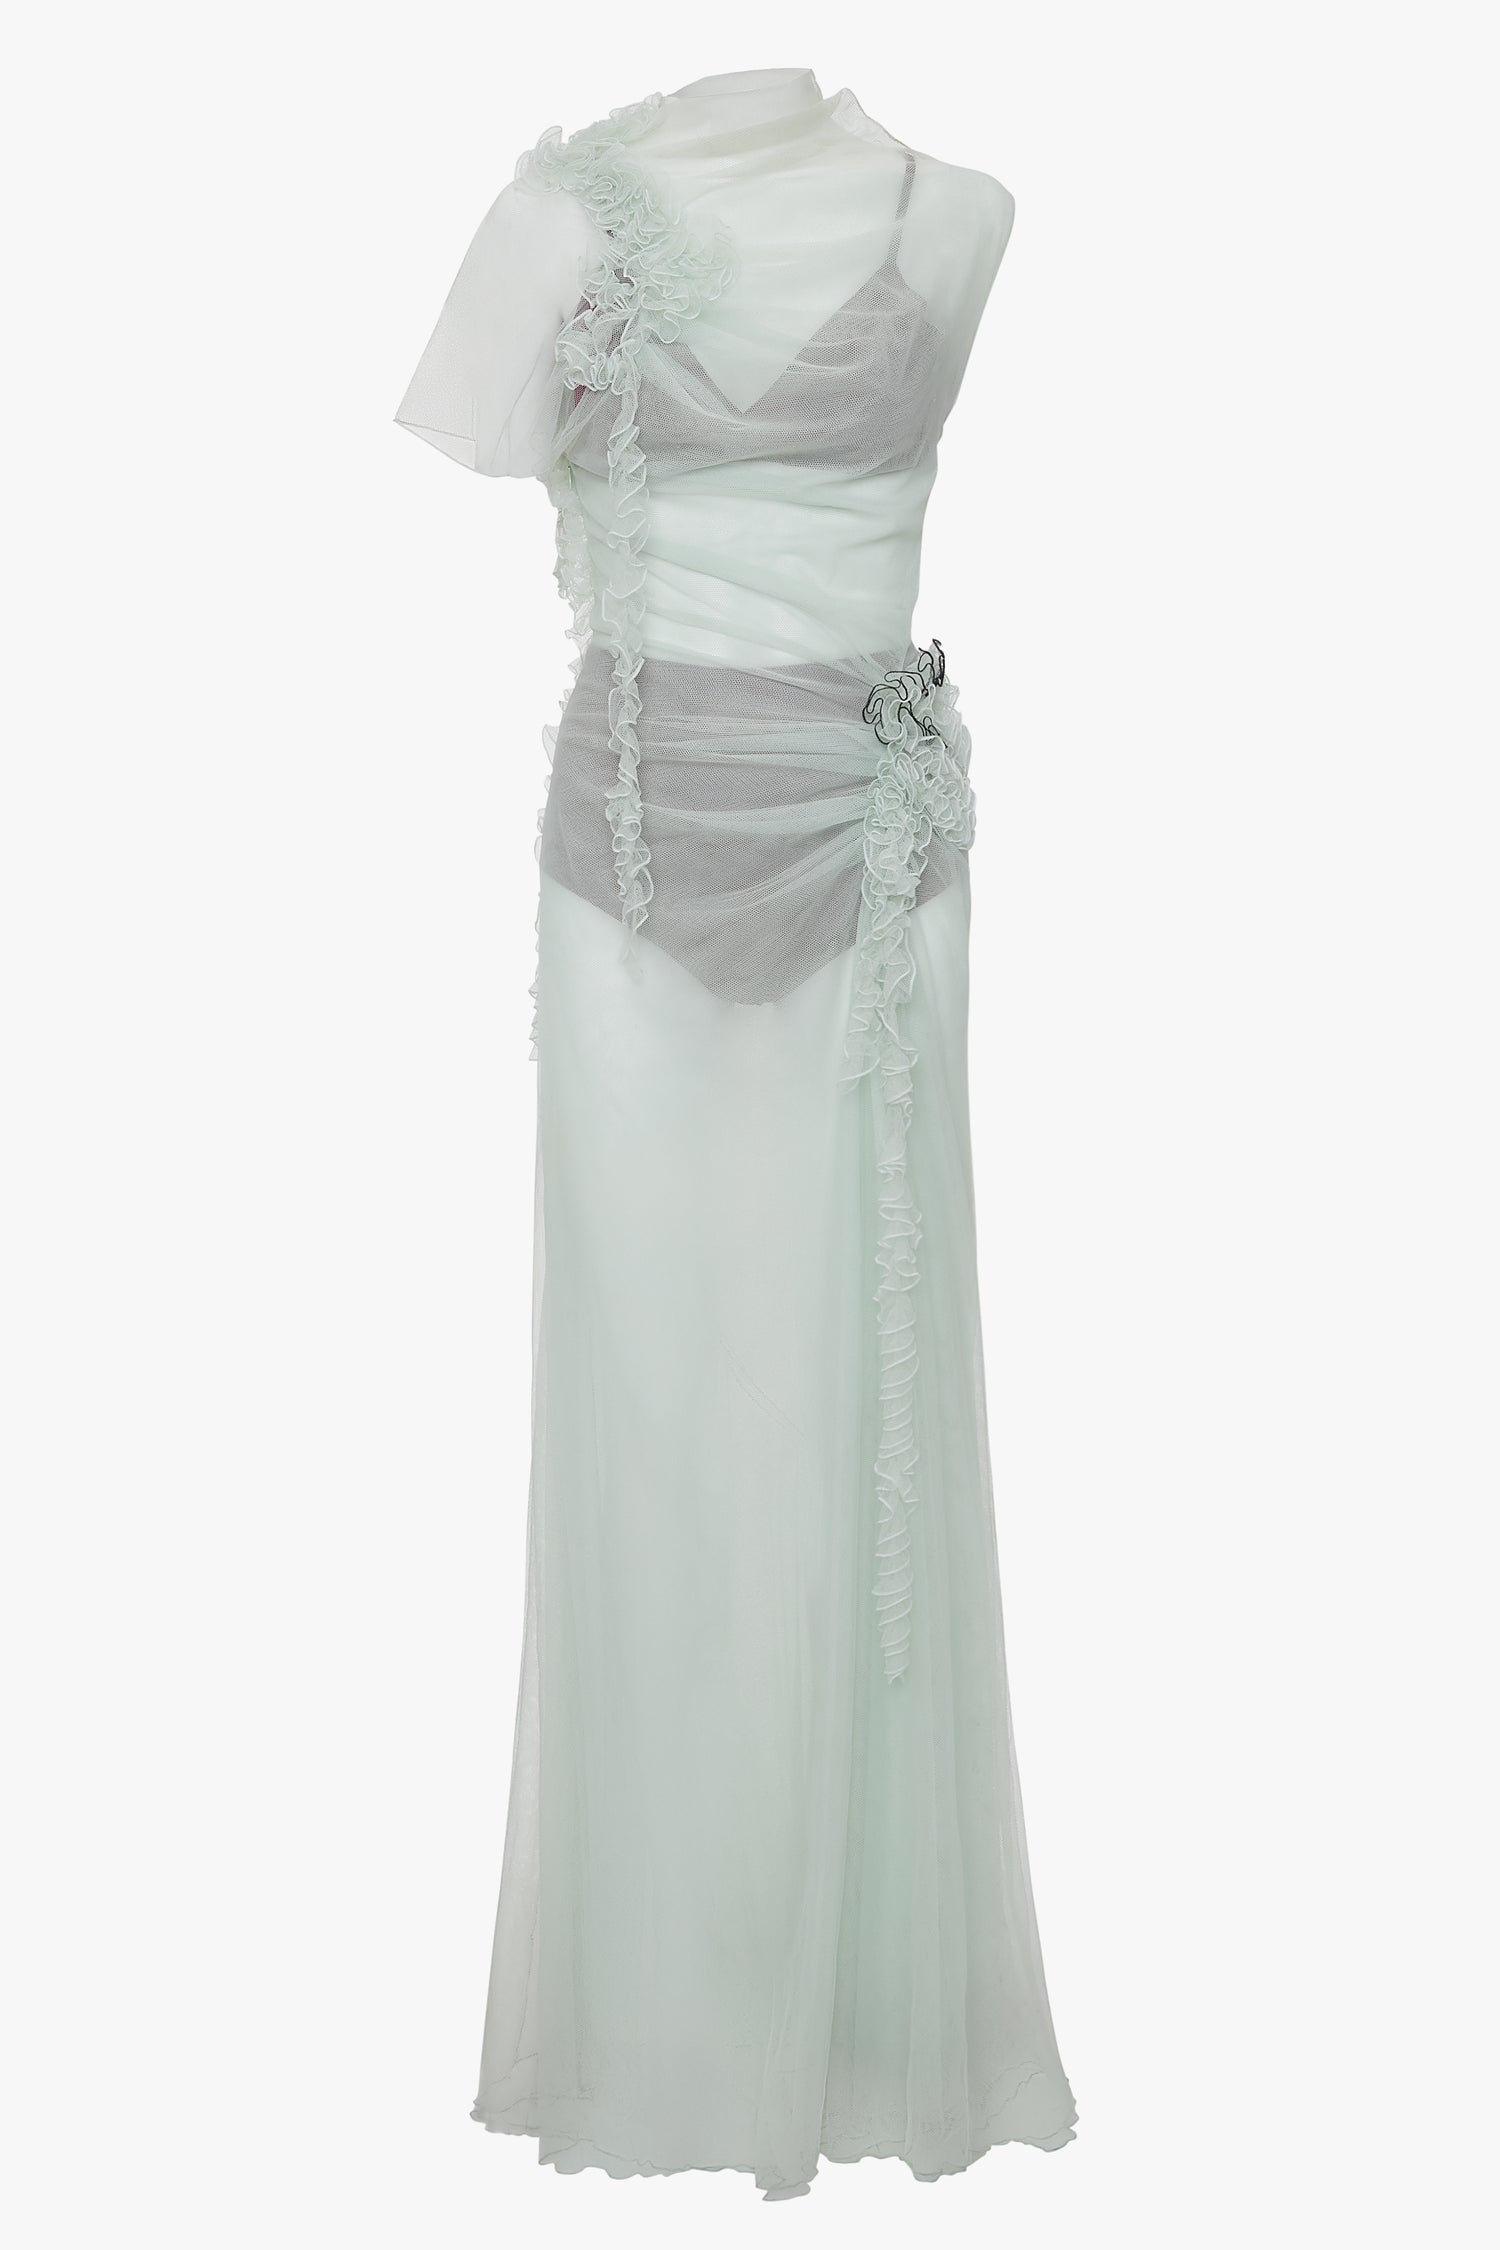 A sheer, flowing Victoria Beckham Gathered Tulle Detail Floor-Length Dress In Jade with an asymmetrical design, featuring a ruffled overlay and floral embellishment at the waist, in light pastel sea foam green tulle.